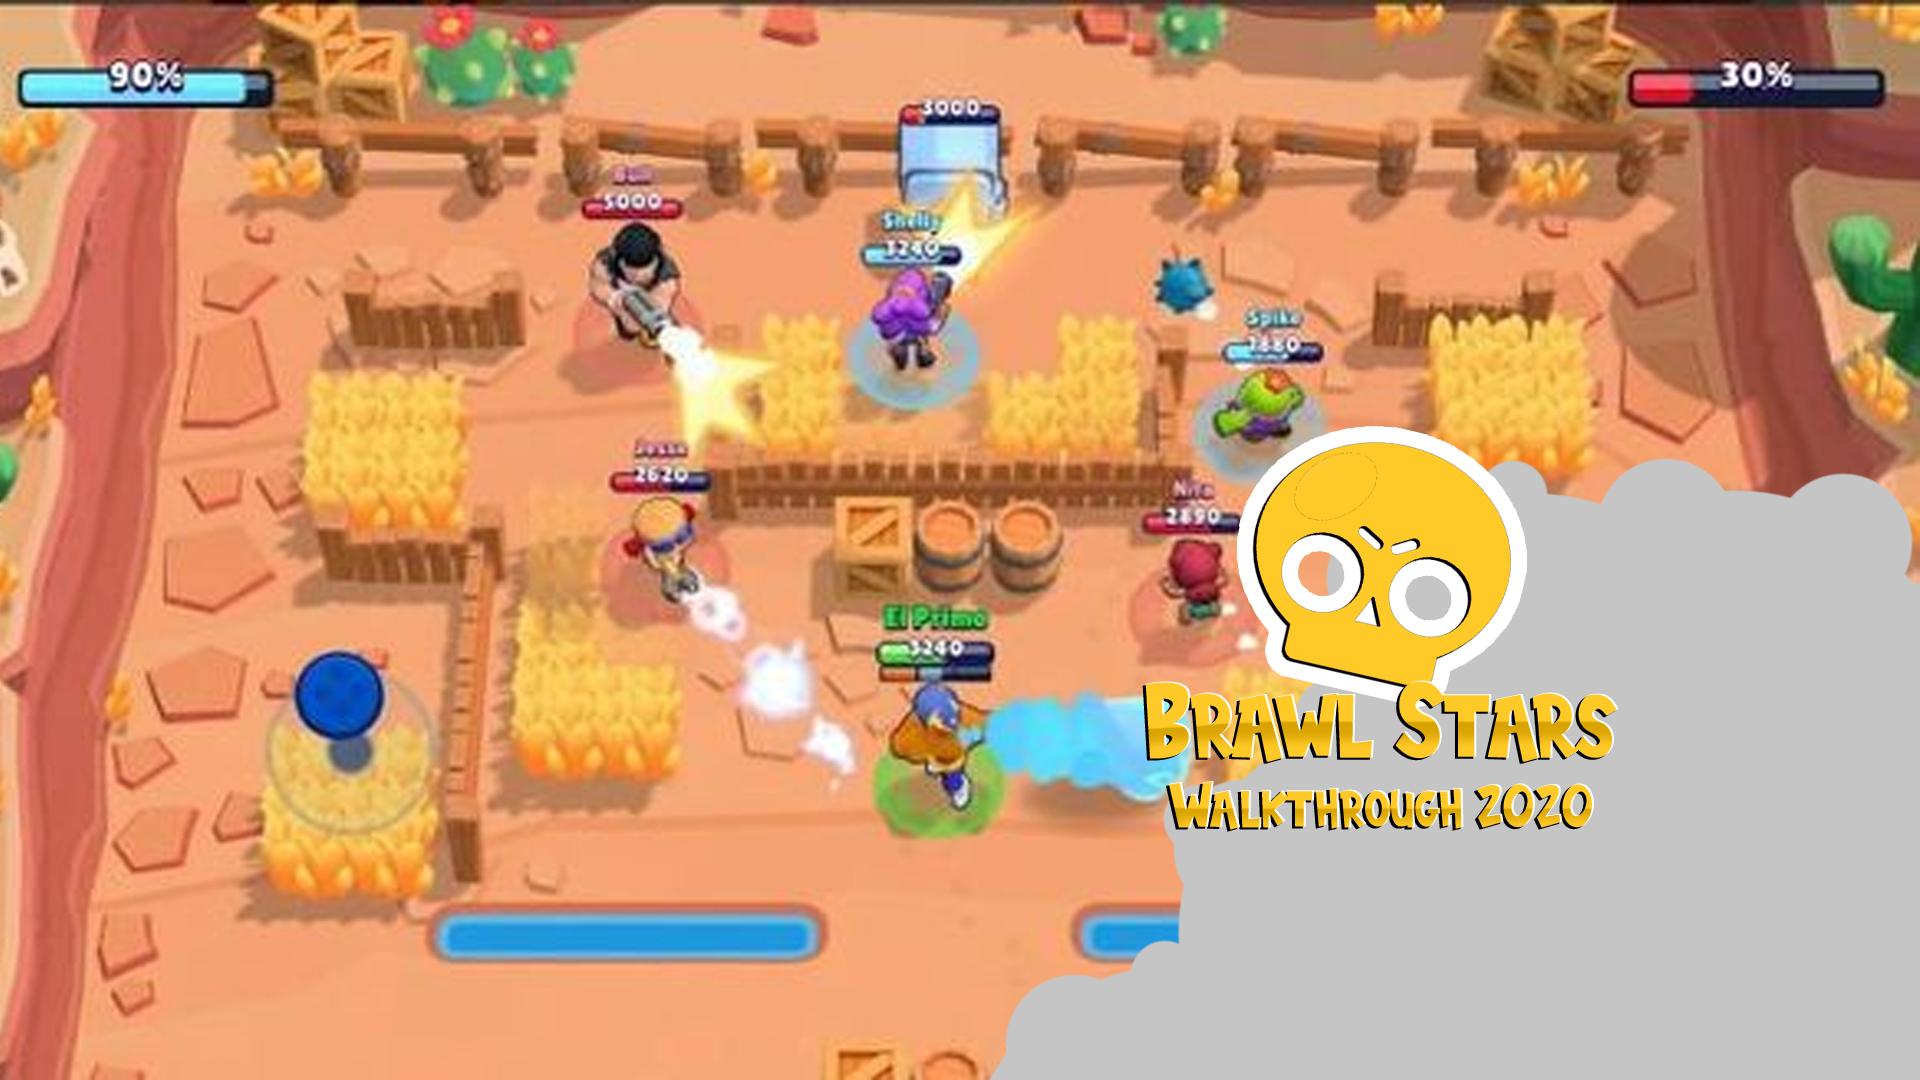 Complete Brawl Stars Walkthrough 2020 For Android Apk Download - brawl stars slither.io